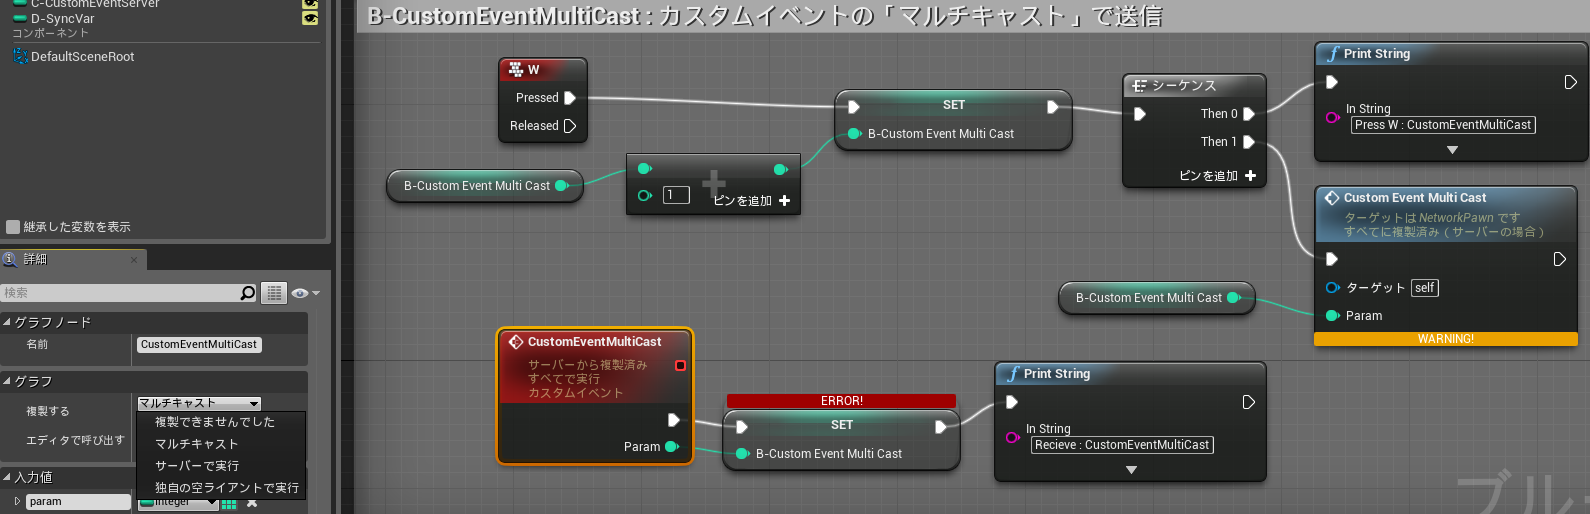 ue4-network-sync04.png